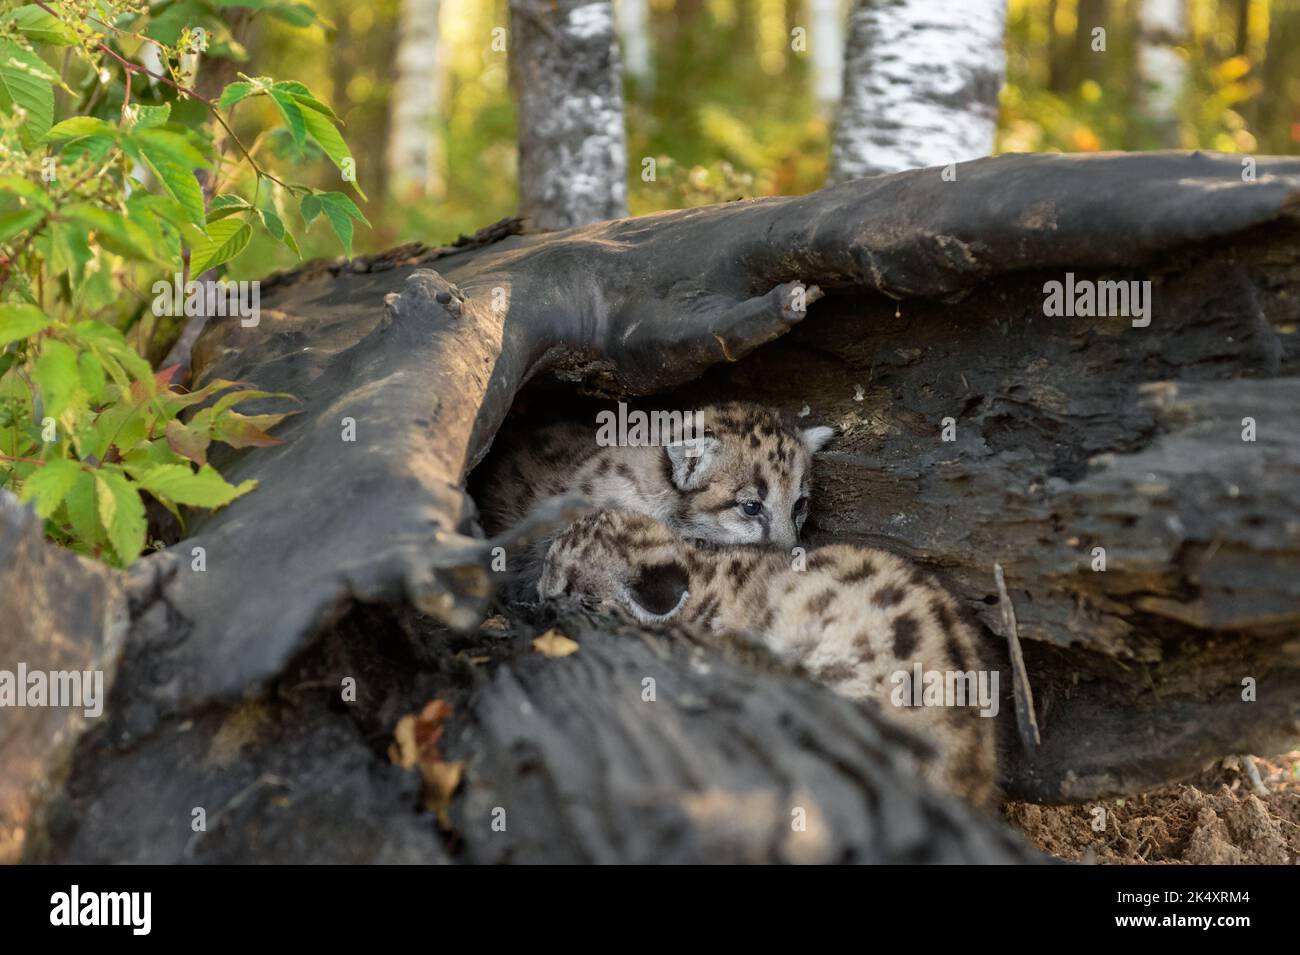 Cougar Kittens (Puma concolor) Climb About Inside Log Autumn - captive animals Stock Photo